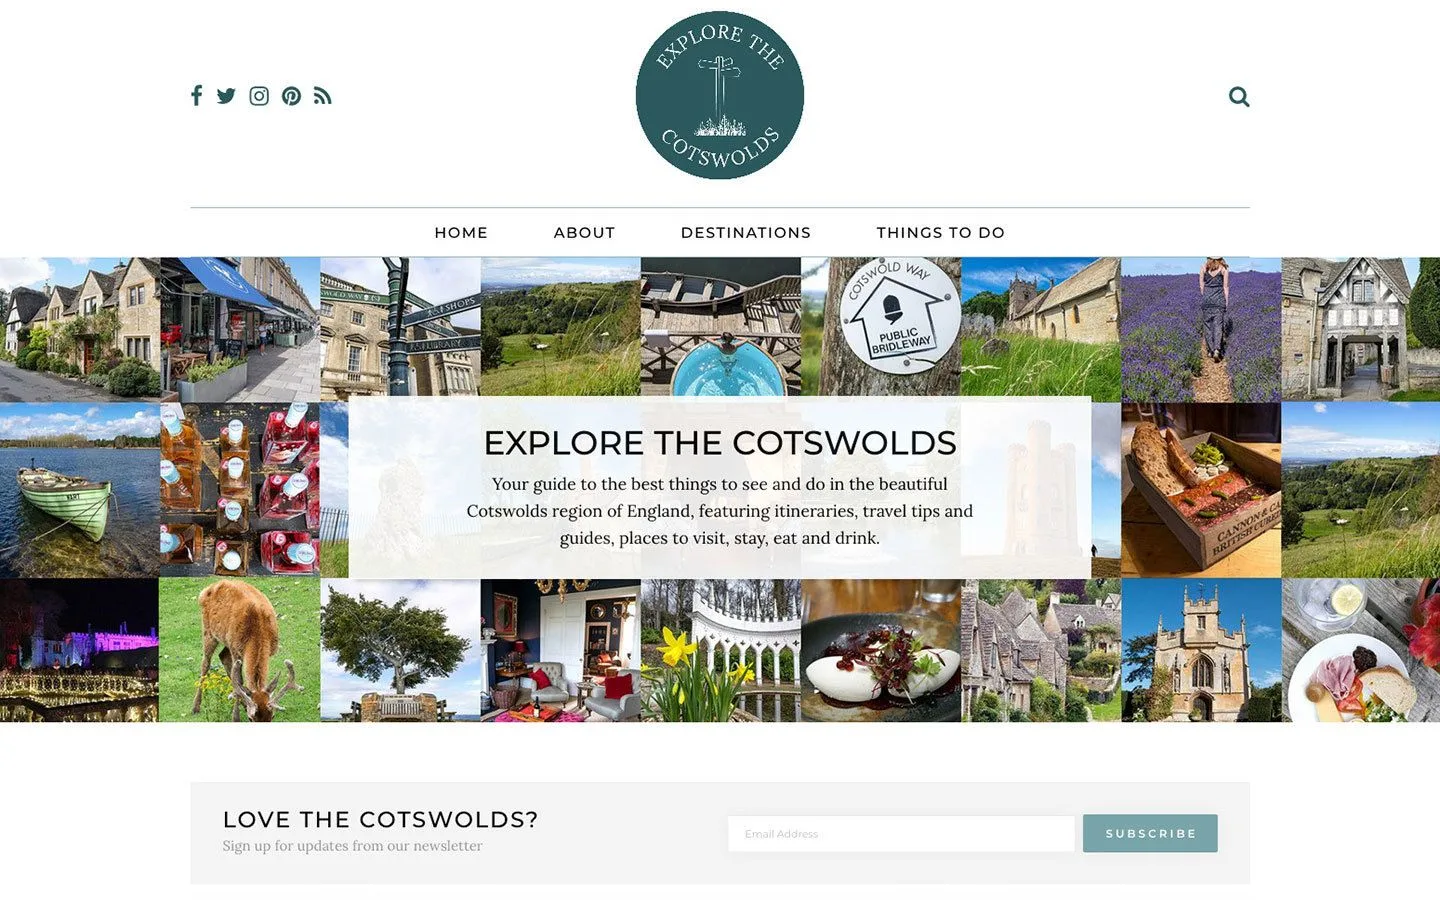 The homepage of the Explore the Cotswolds website